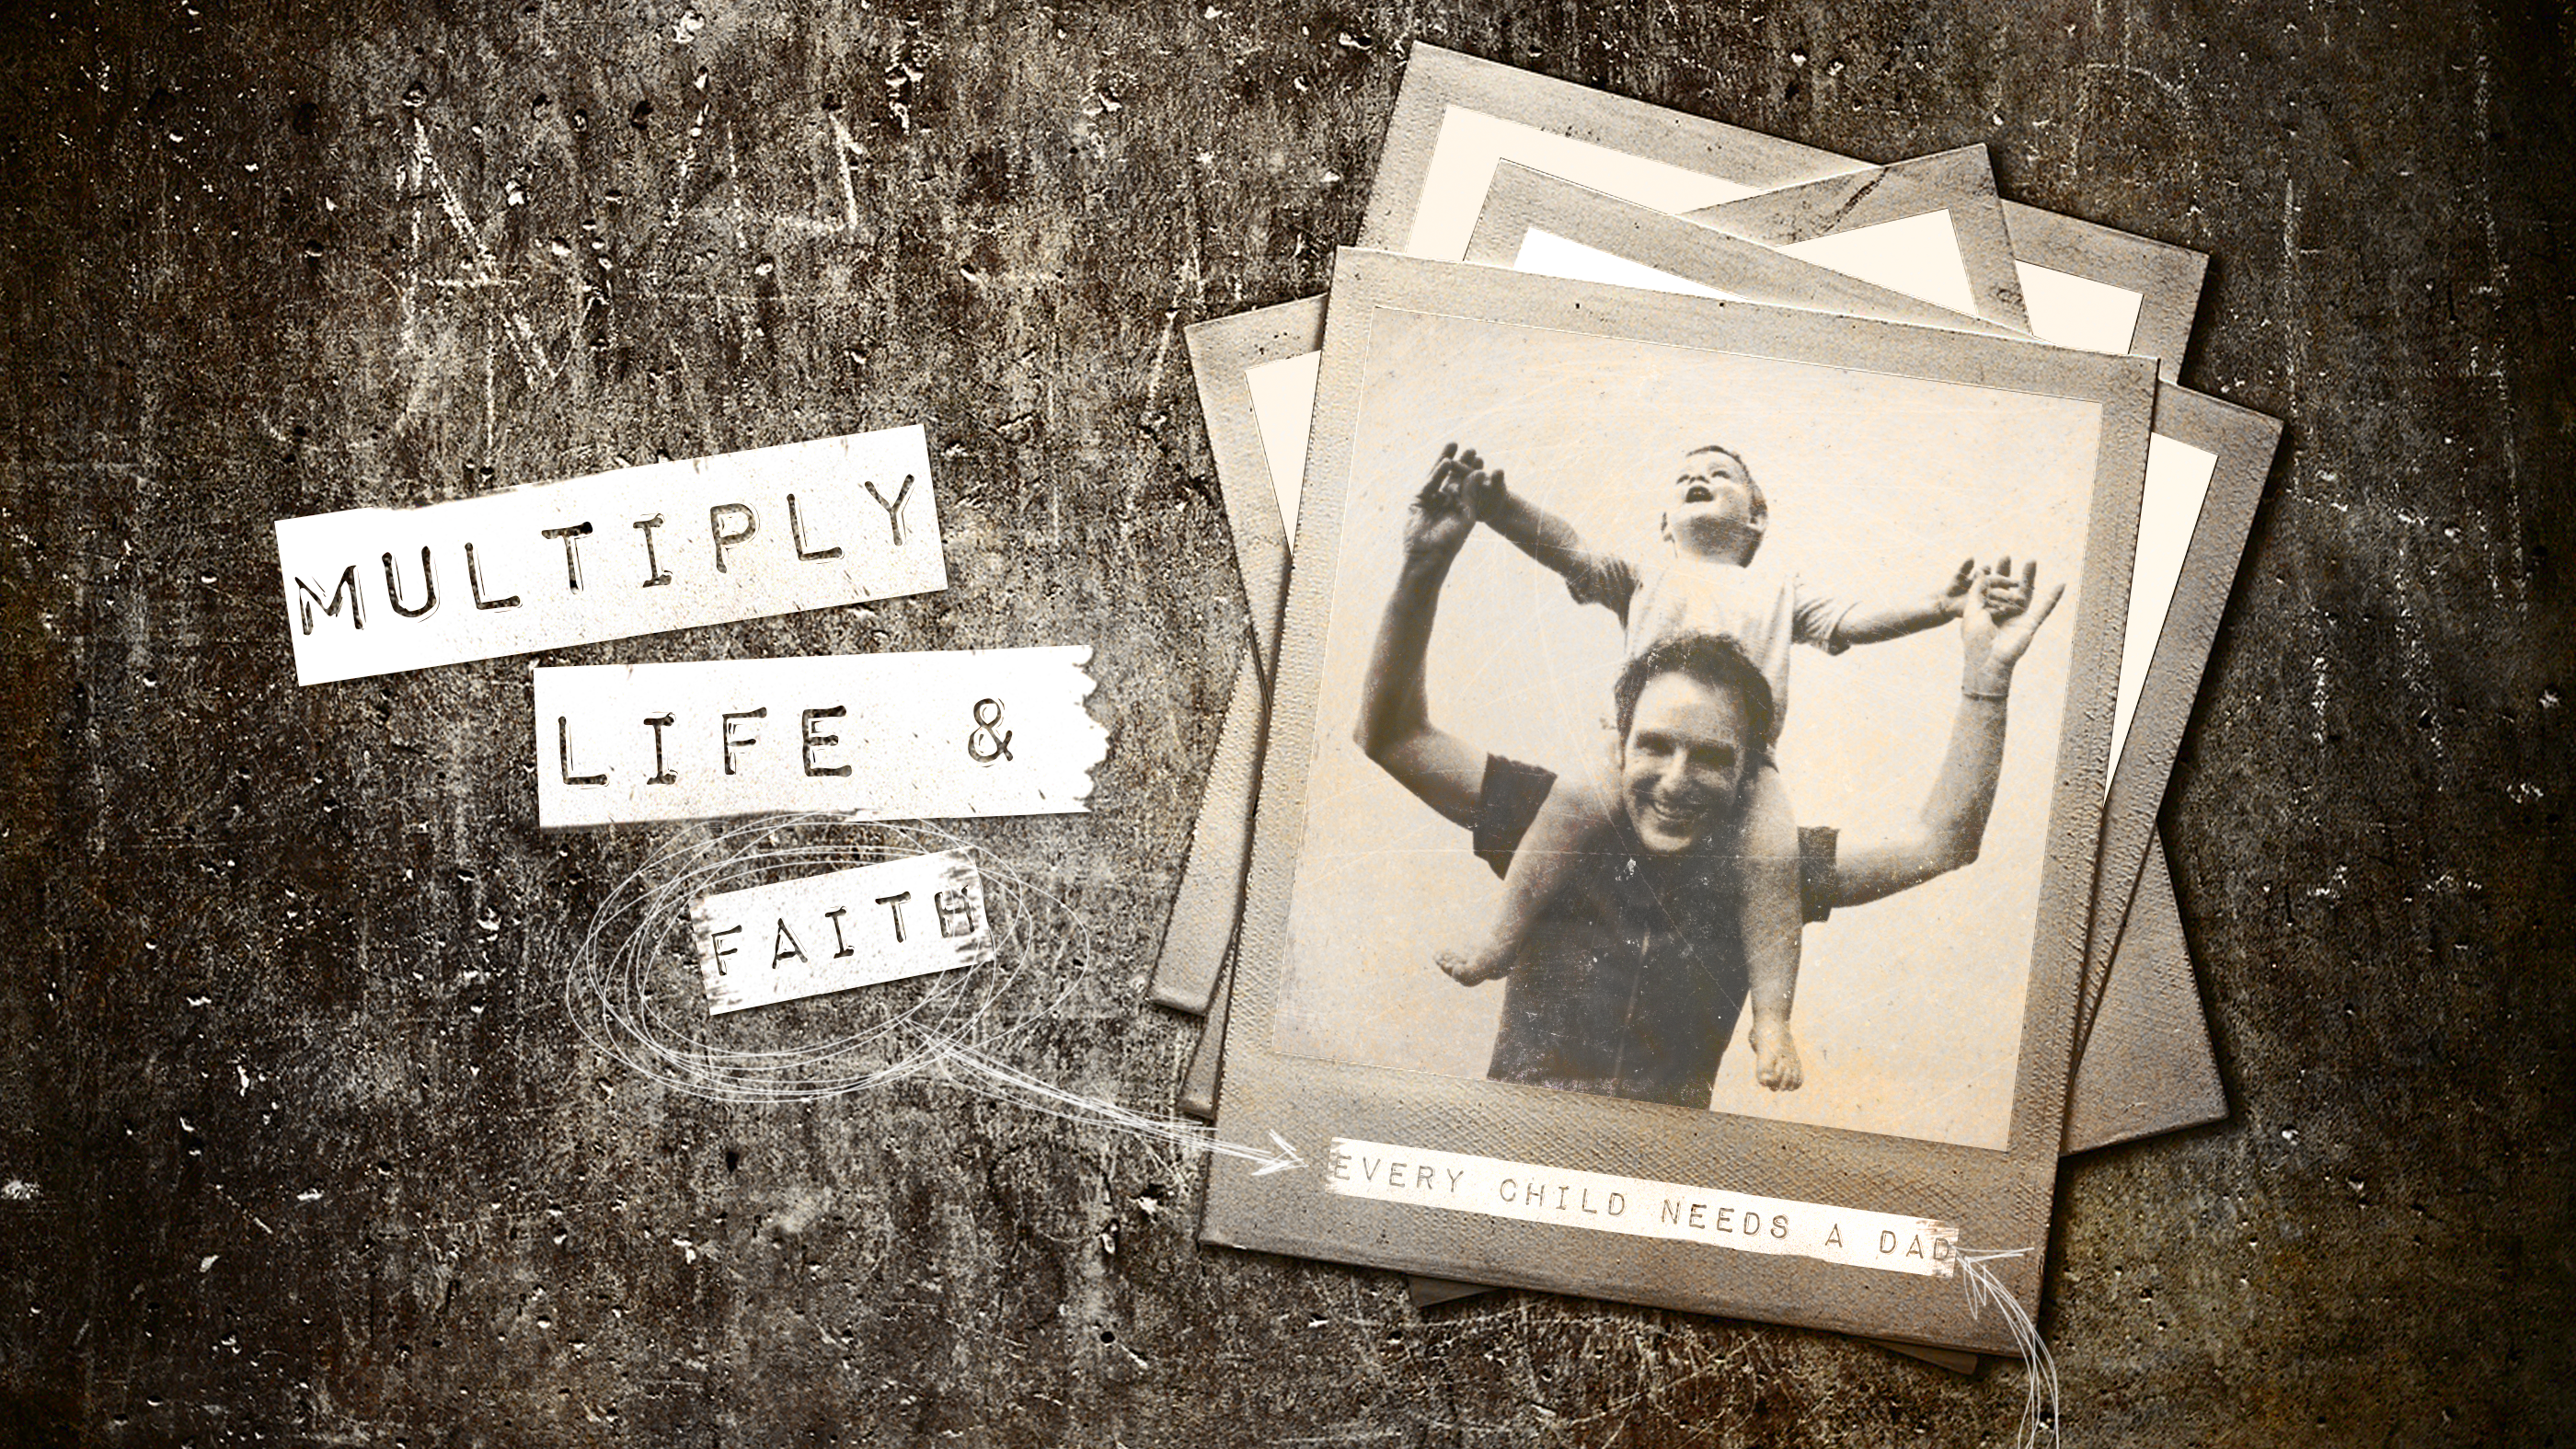 Multiply Life and Faith: Every Child Needs a Dad